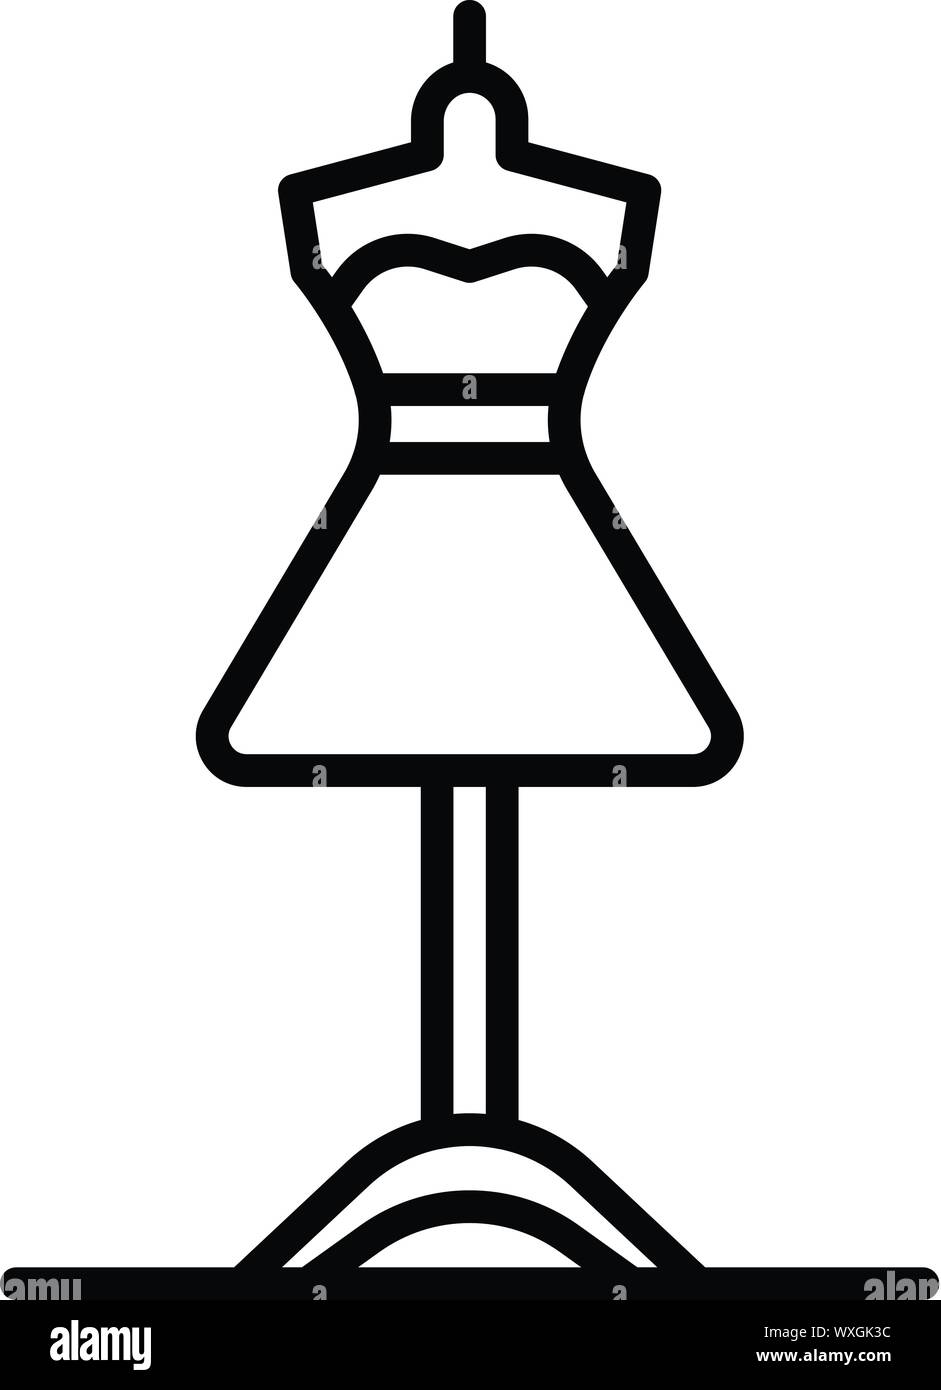 Dress mannequin icon outline style Royalty Free Vector Image